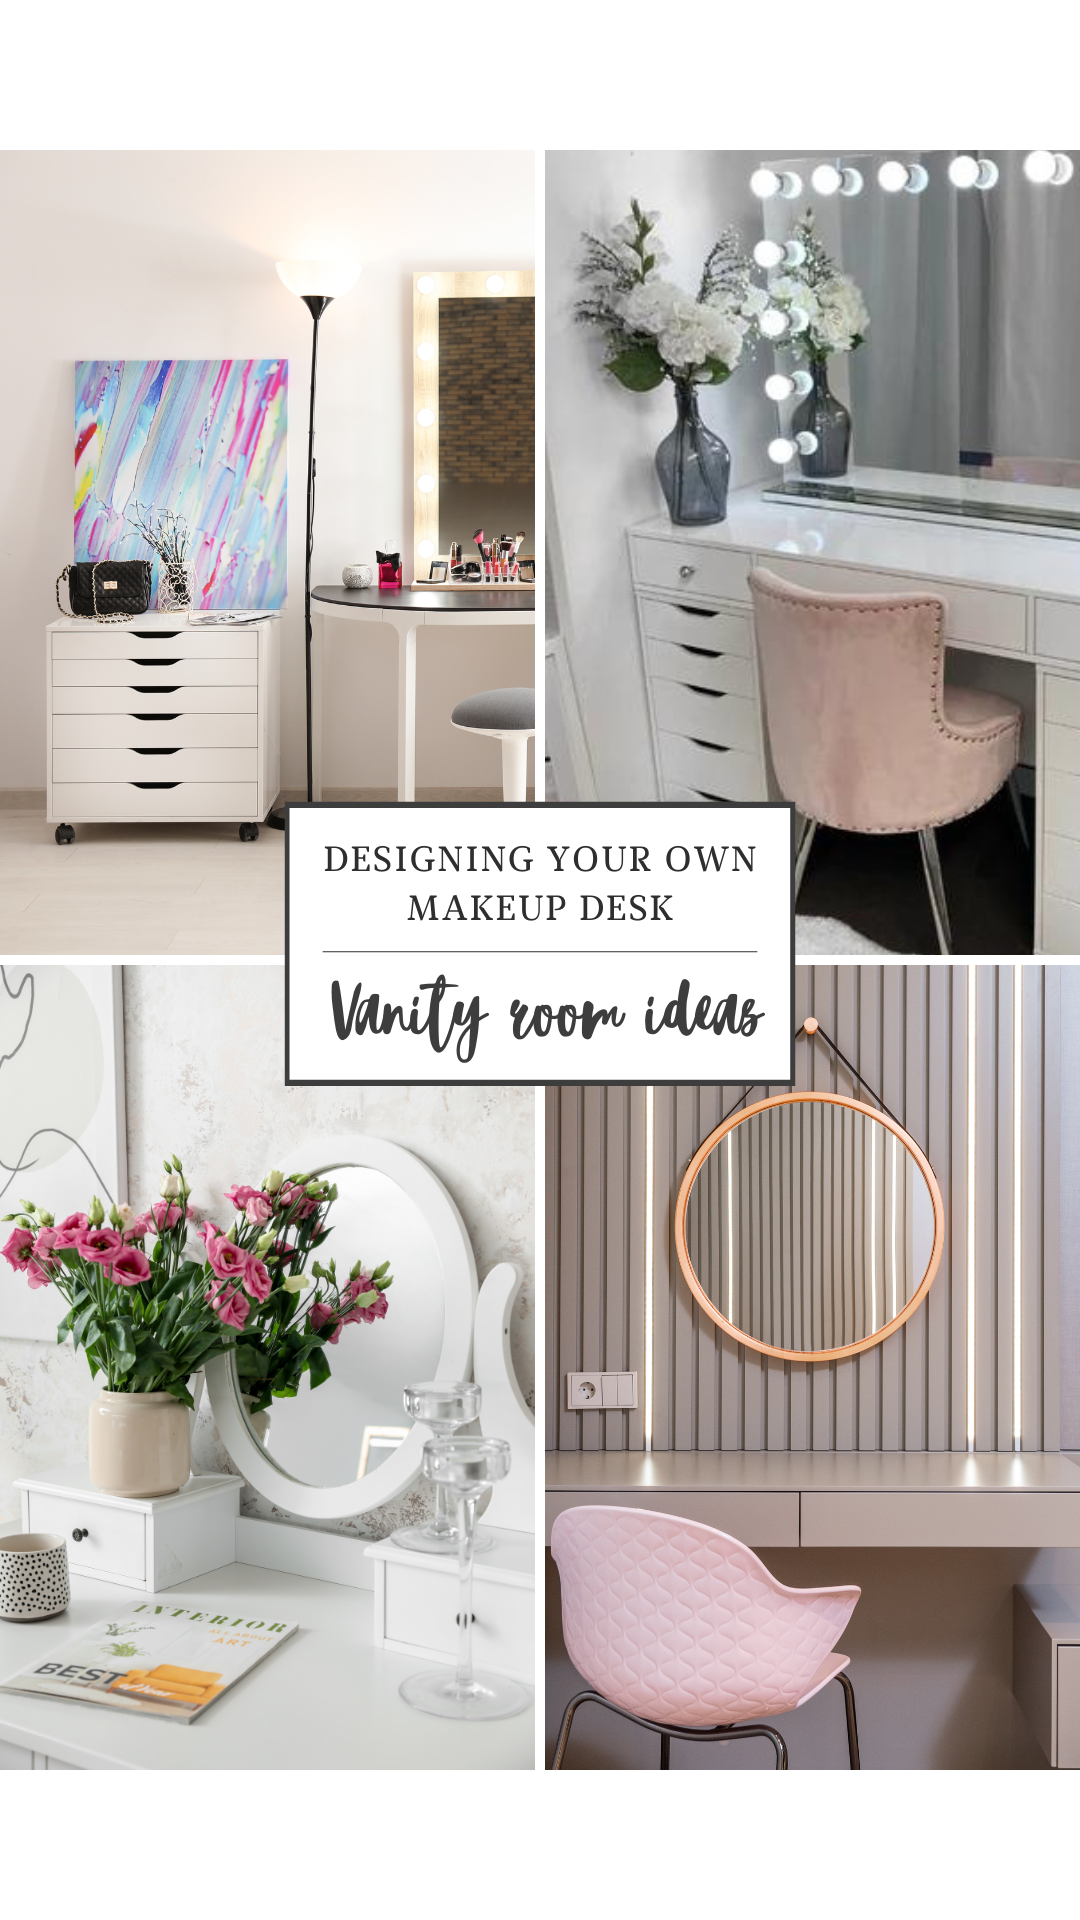 Designing Your Own Makeup Desk with IKEA ALEX 5 Drawers: Ideas To Create And Organise the Perfect Vanity Setup.